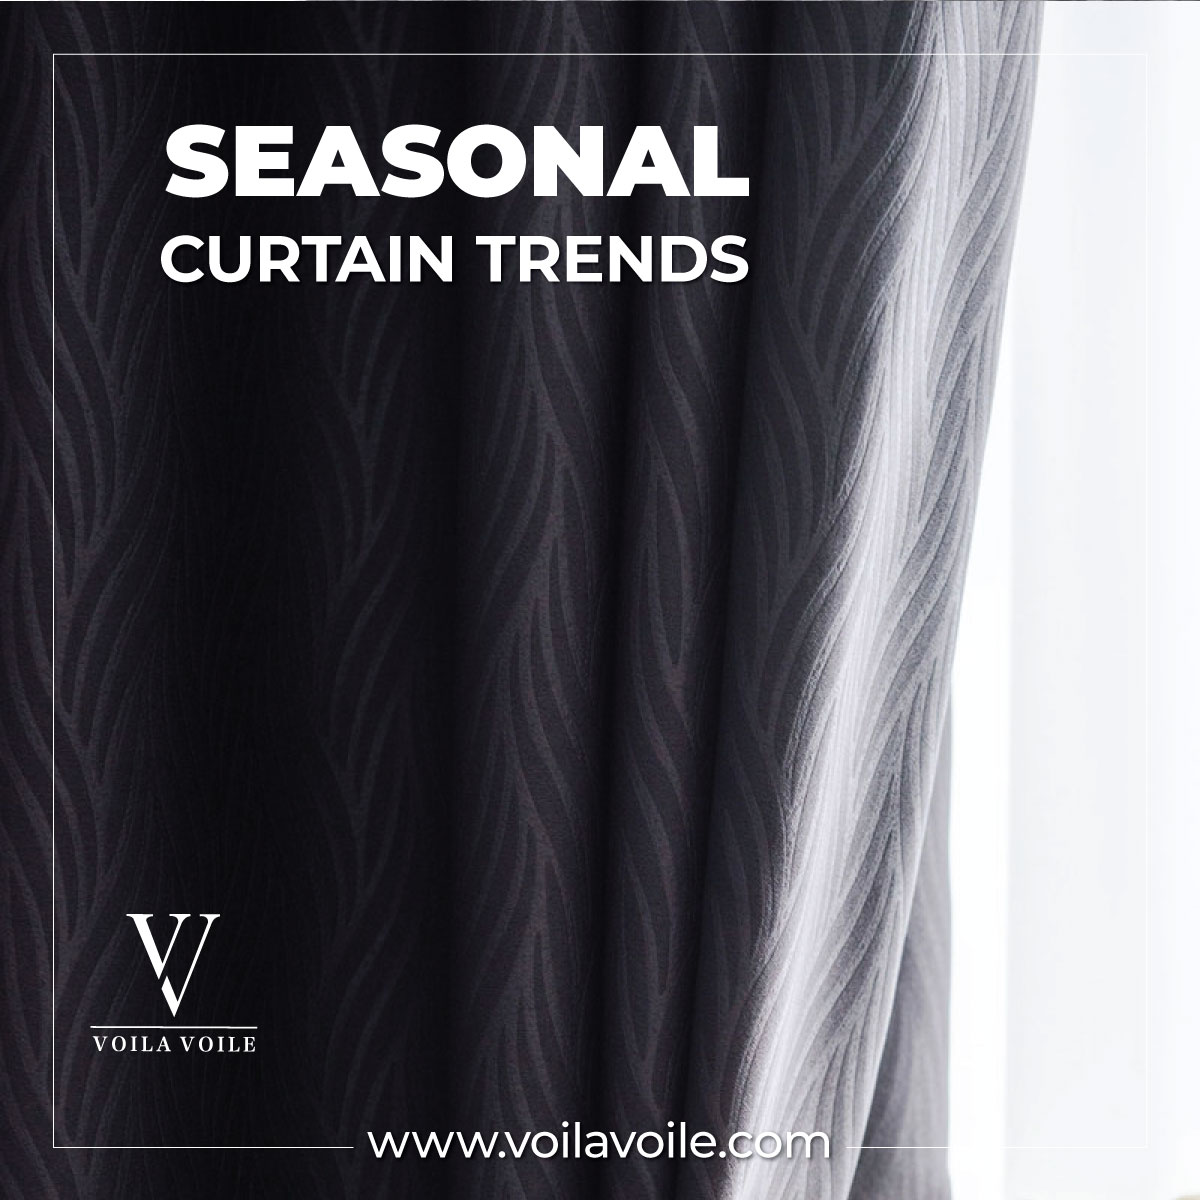 From Summer Breeze to Winter Warmth: Seasonal Curtain Trends